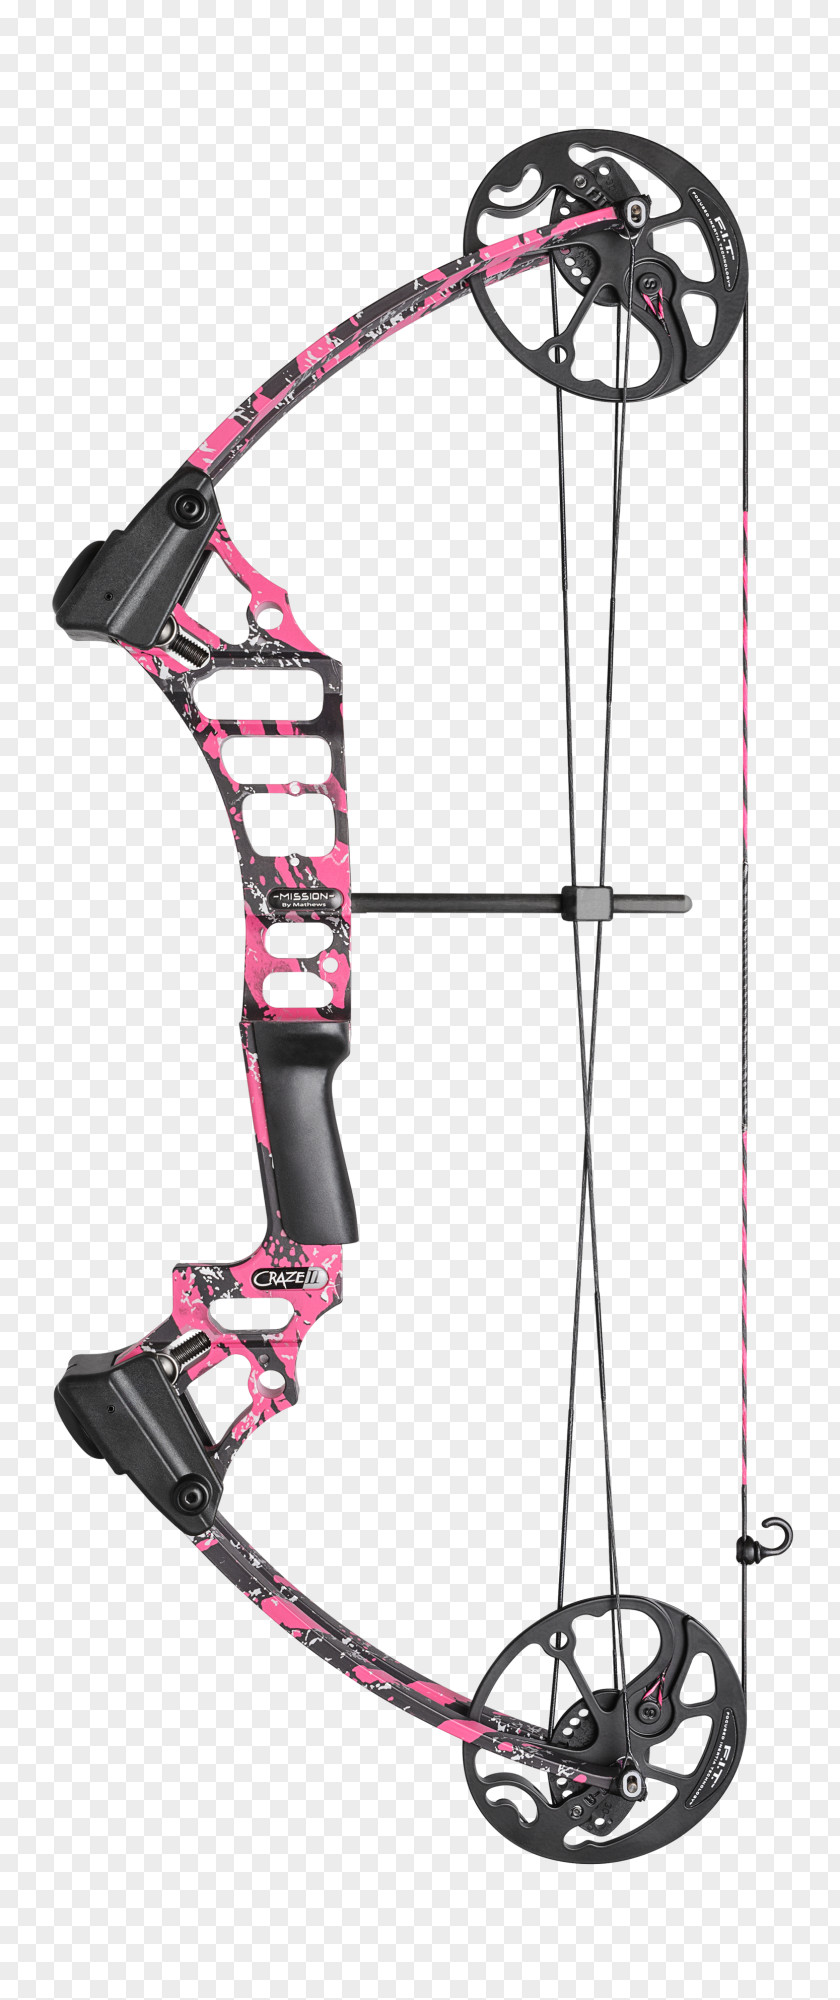 Arrow Pink Archery Compound Bows Hunting Bow And PNG